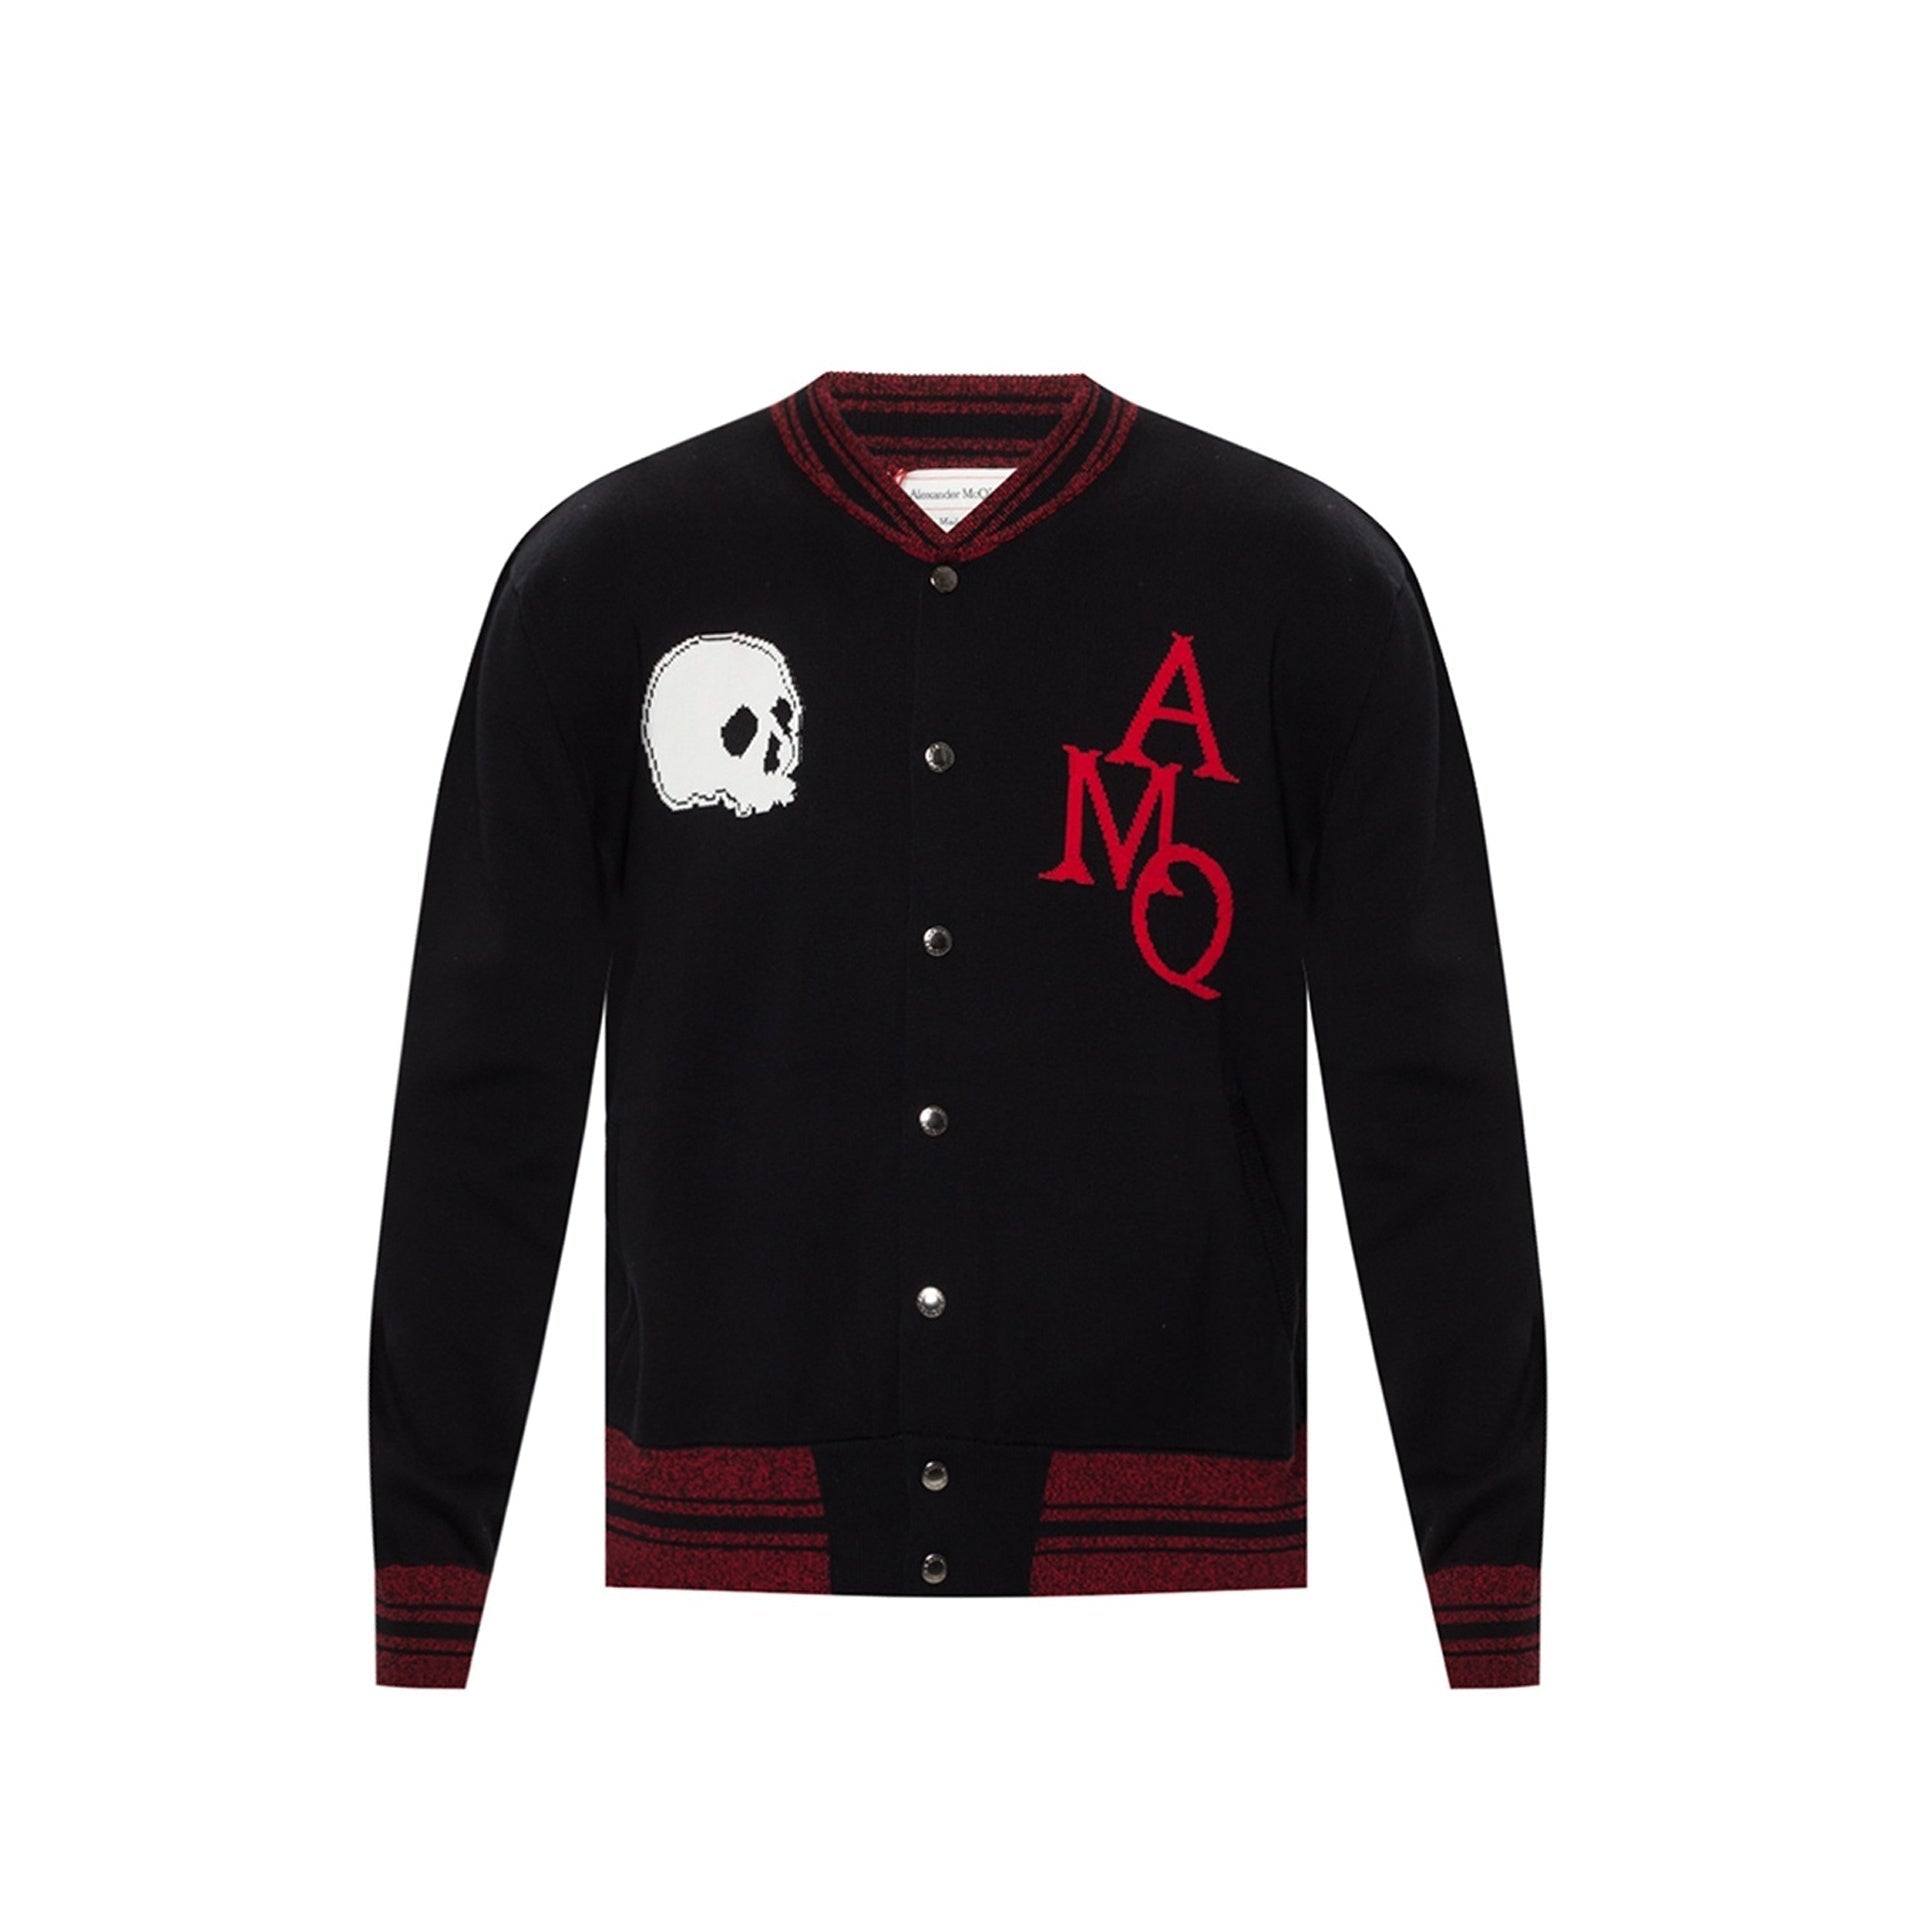 ALEXANDER-MCQUEEN-OUTLET-SALE-Alexander-McQueen-Knitted-Cardigan-Strick-BLACK-L-ARCHIVE-COLLECTION.jpg